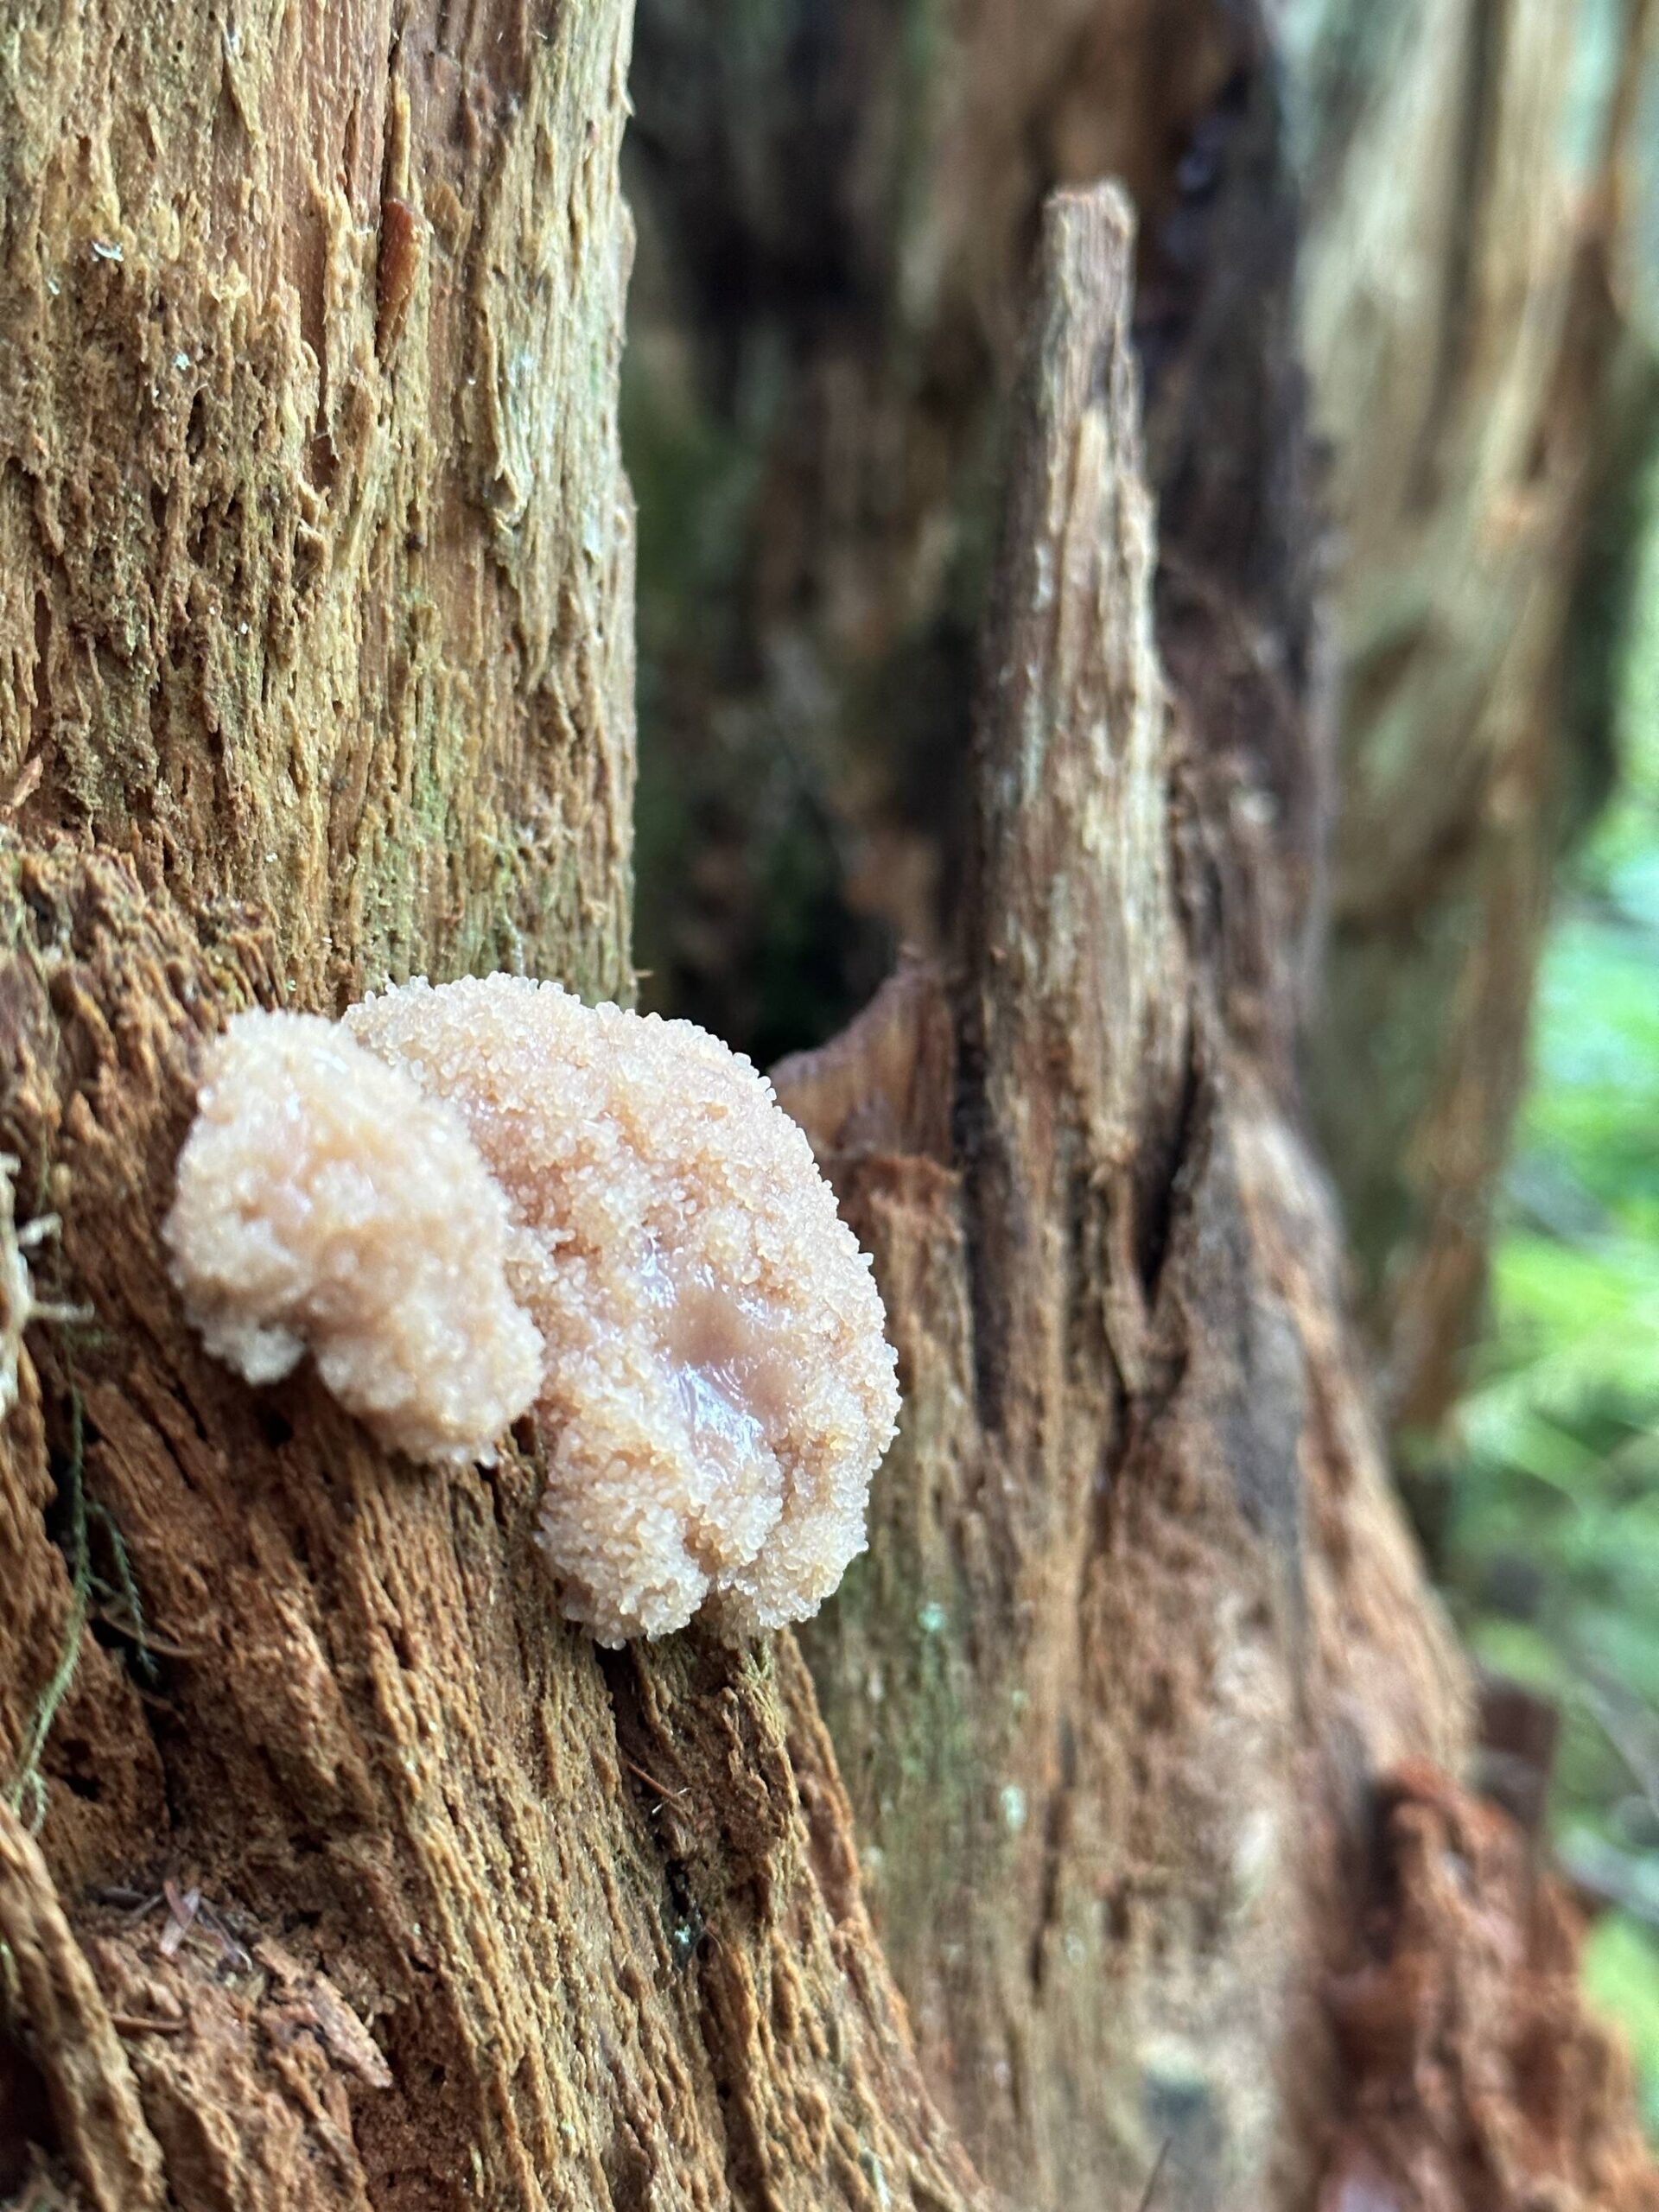 What appears to be slime mold grows on a tree along the Dzantik’i Heeni Loop Trail on Sept. 16. (Photo by Deana Barajas)